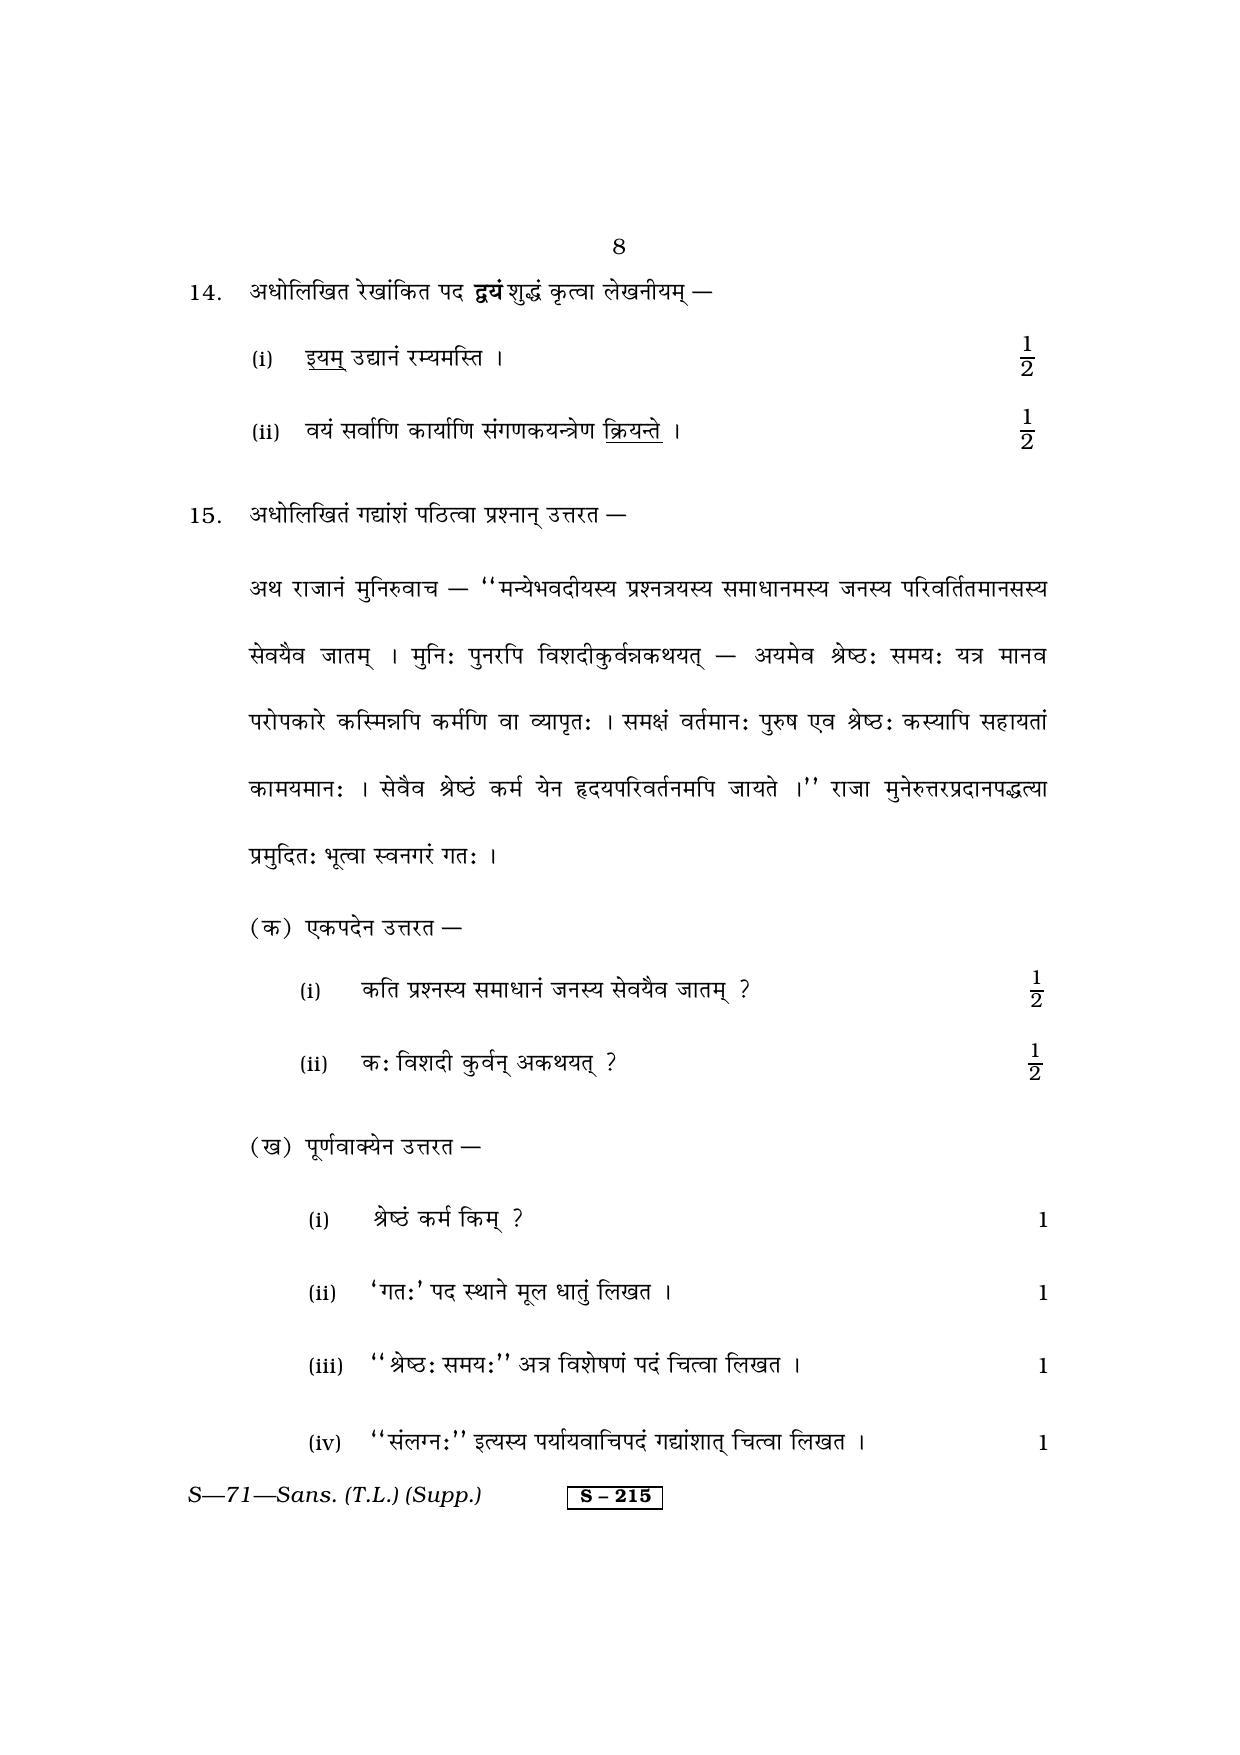 RBSE Class 10 Sanskrit (T.L.) Supplementary 2013 Question Paper - Page 8